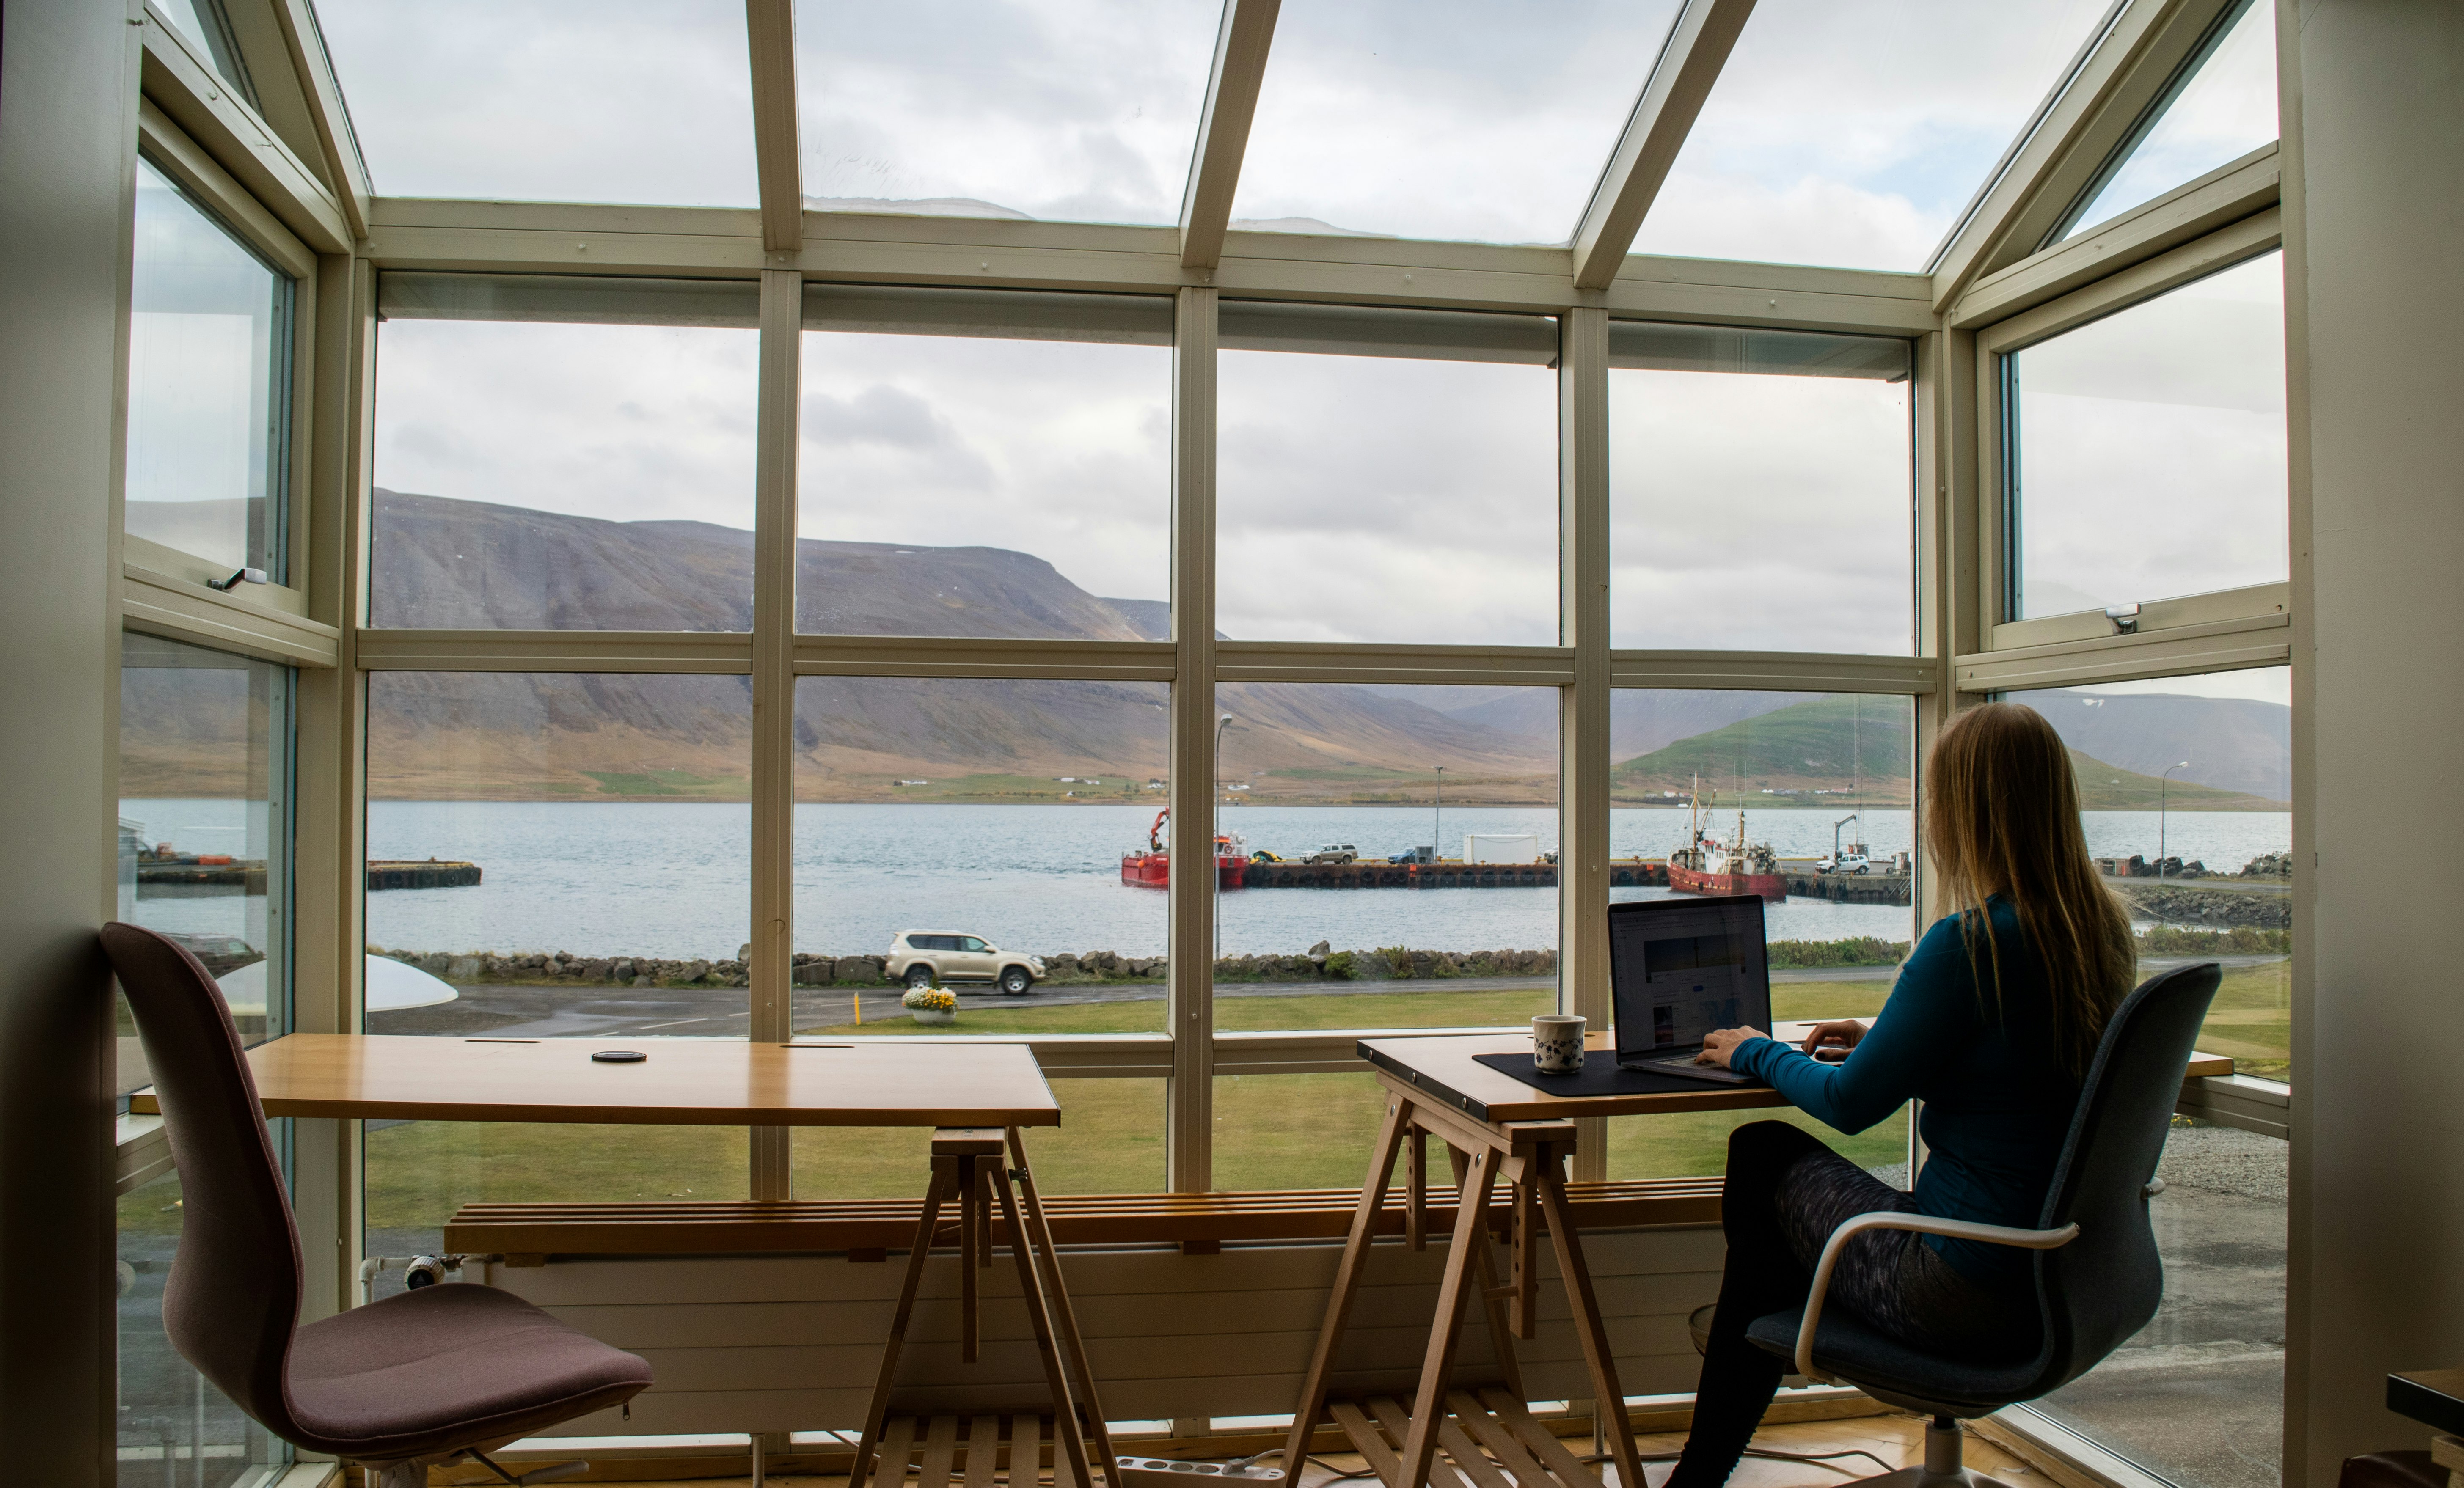 How to get the most out of remote working